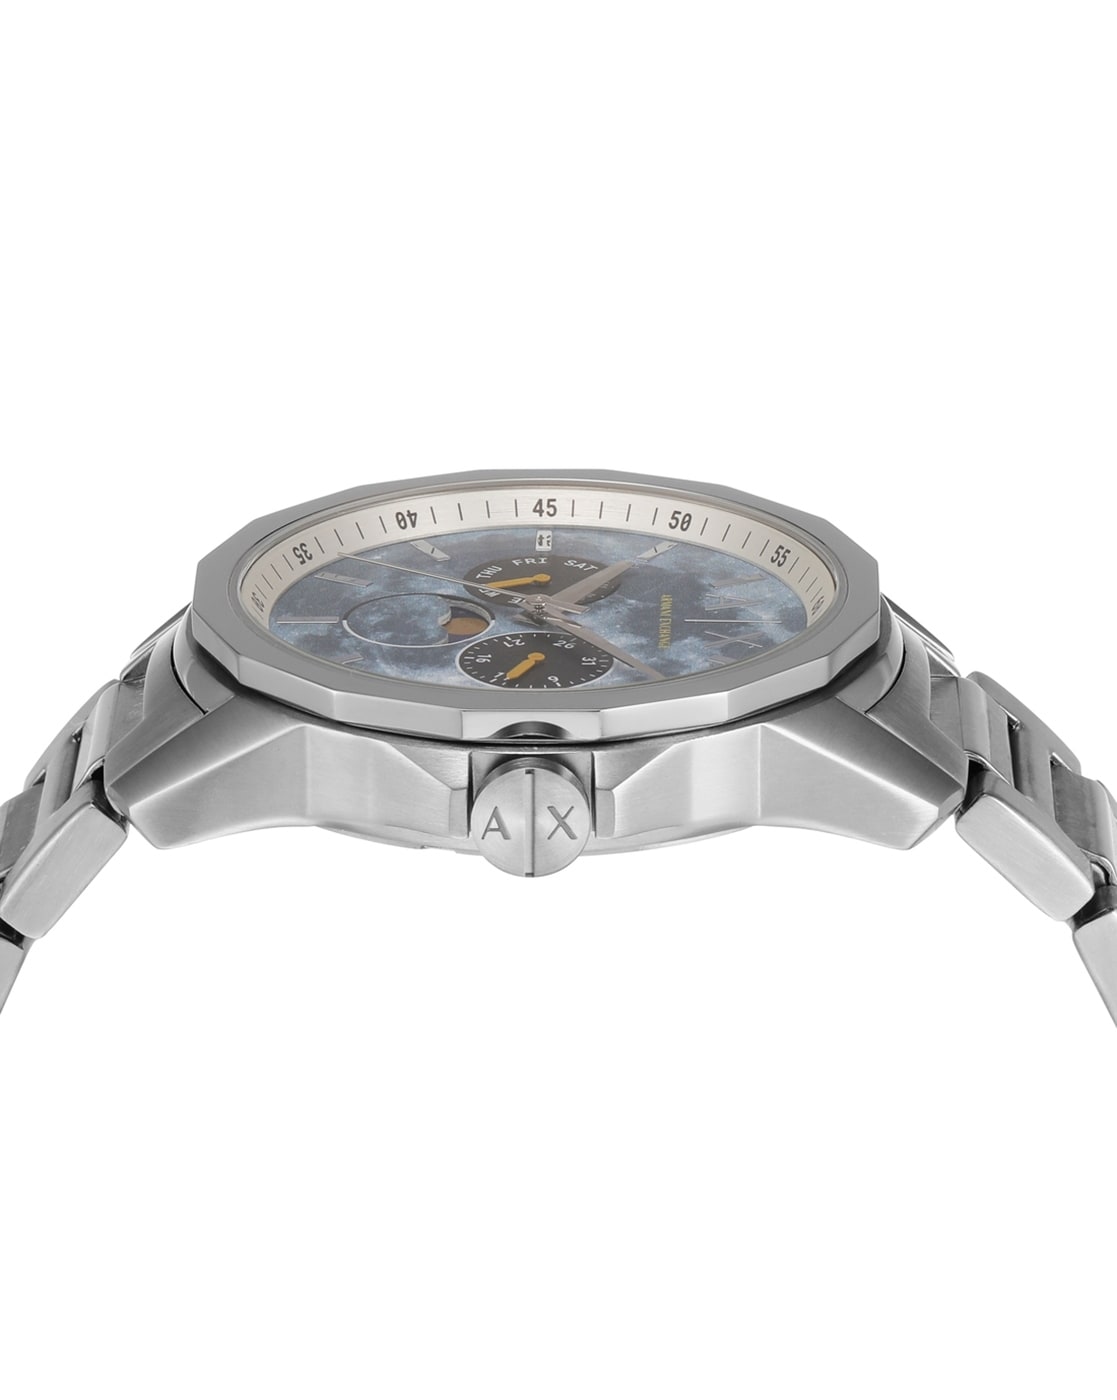 for Silver-Toned EXCHANGE ARMANI Watches Buy Men Online by